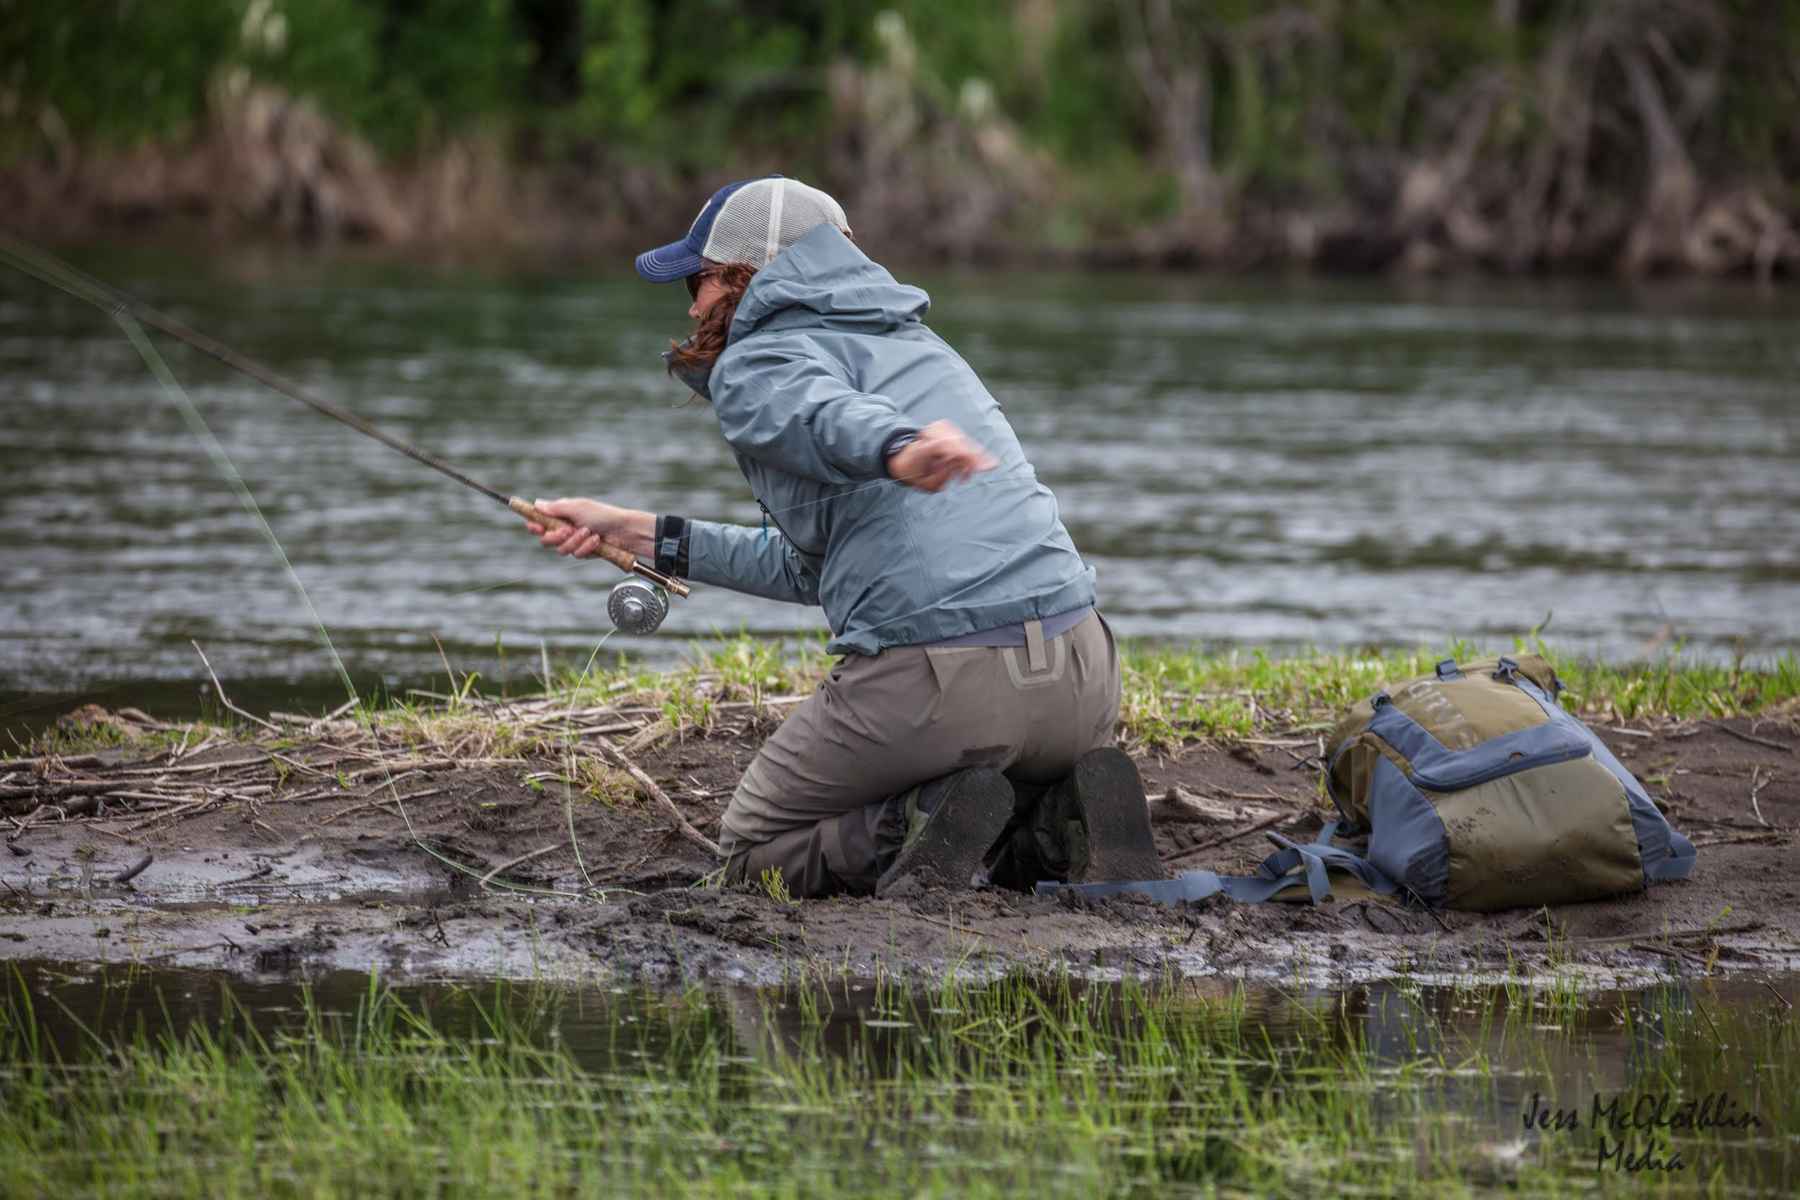 Skwala Start-up Enters the Outerwear Market - Fly Fisherman